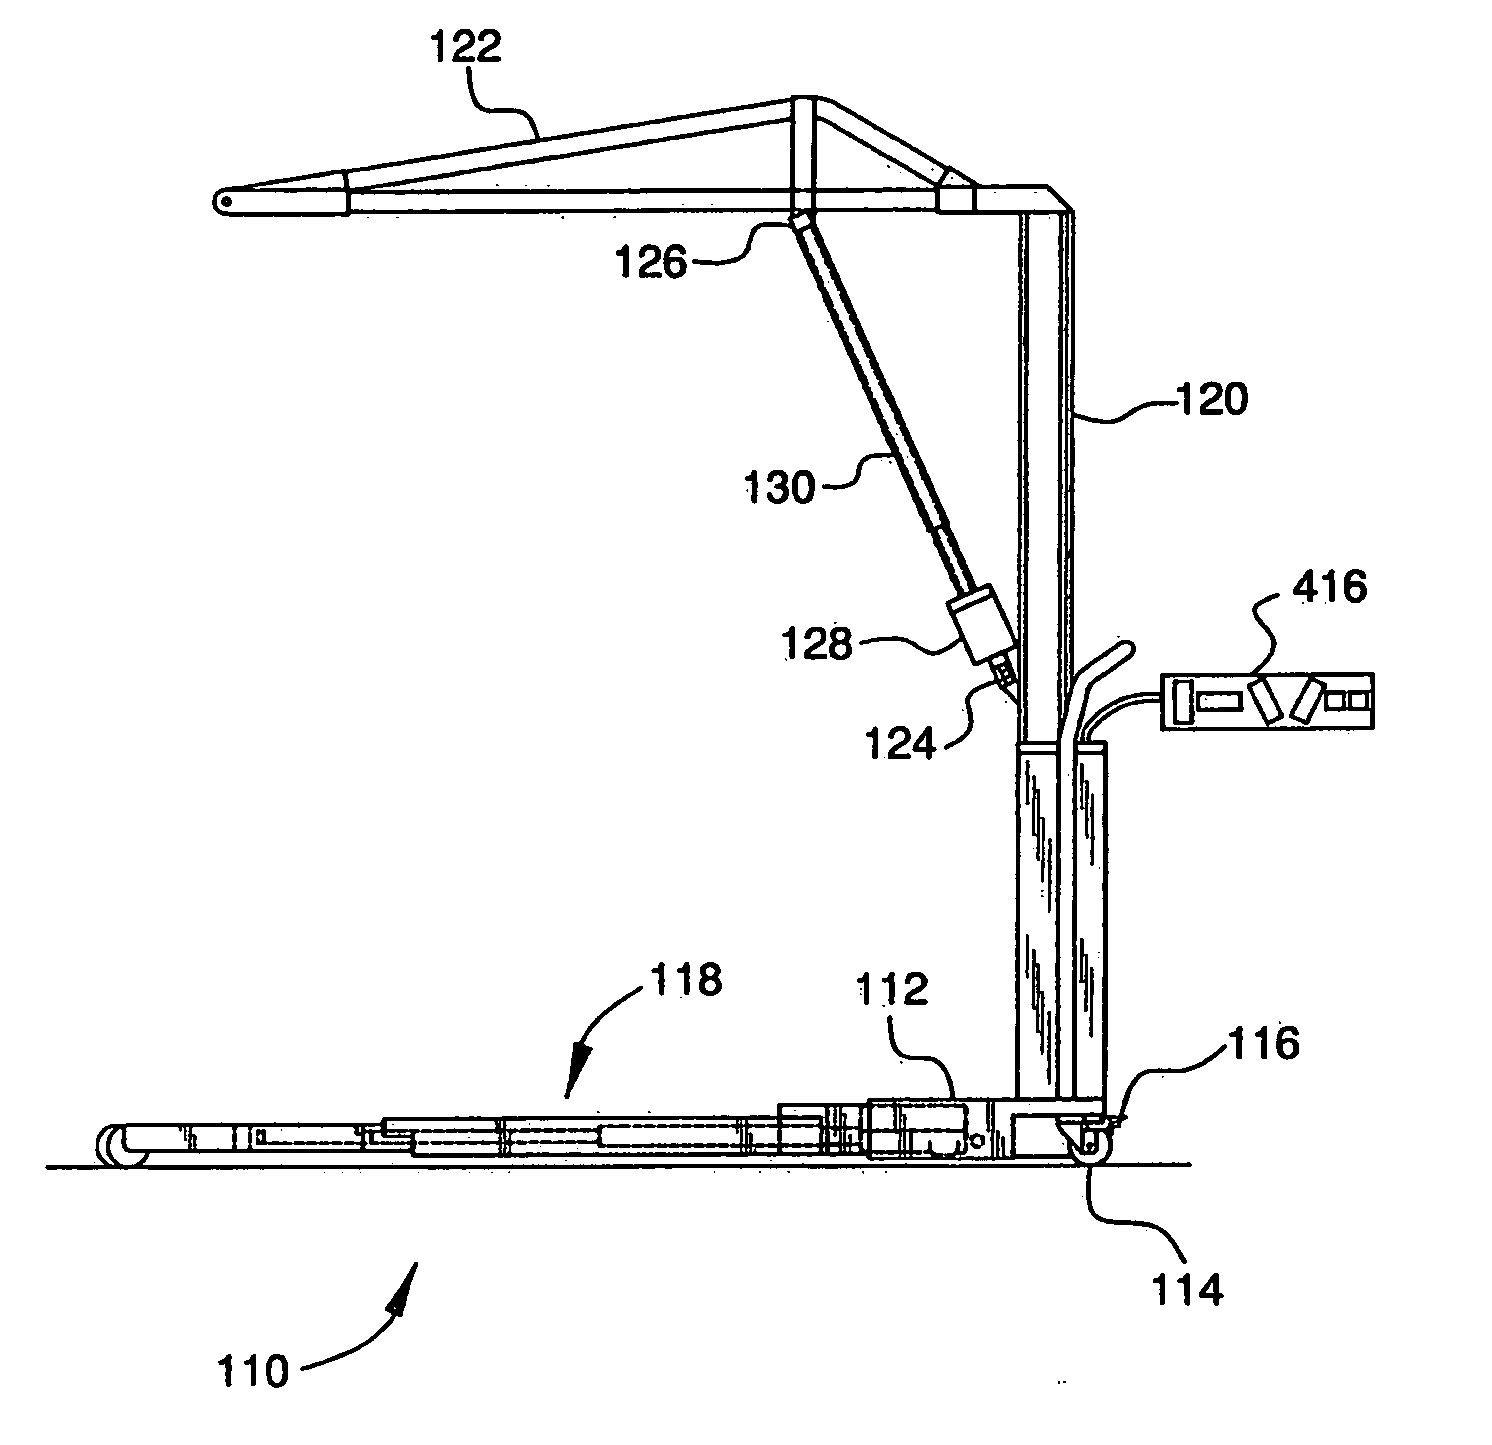 Stretcher supporter for a storable patient lift and transfer device and method for doing the same